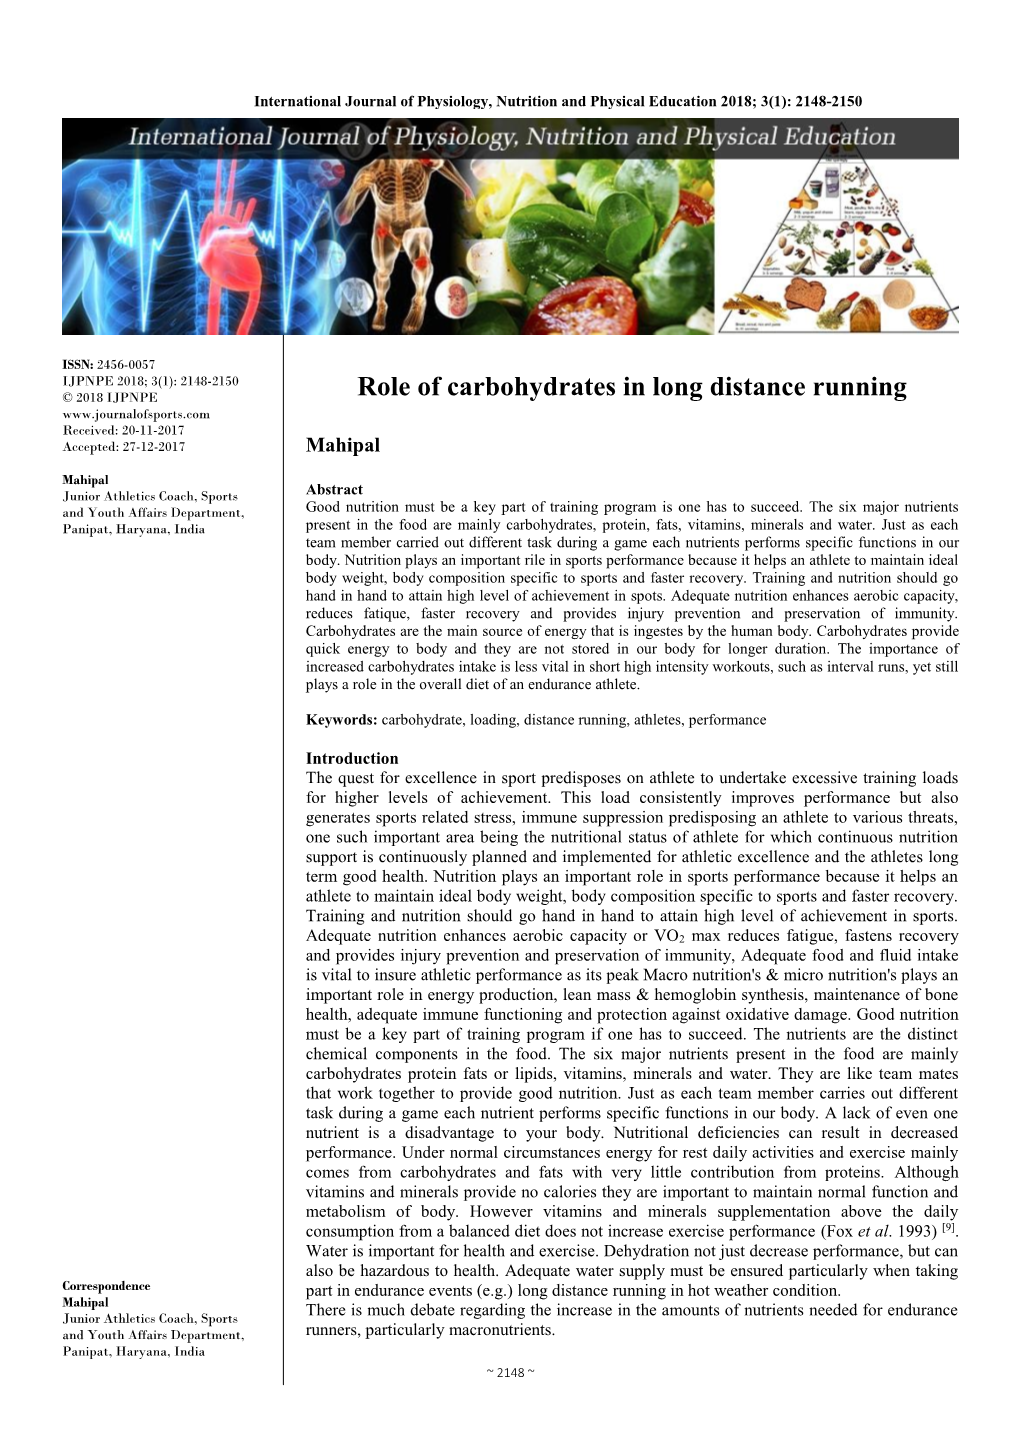 Role of Carbohydrates in Long Distance Running Received: 20-11-2017 Accepted: 27-12-2017 Mahipal